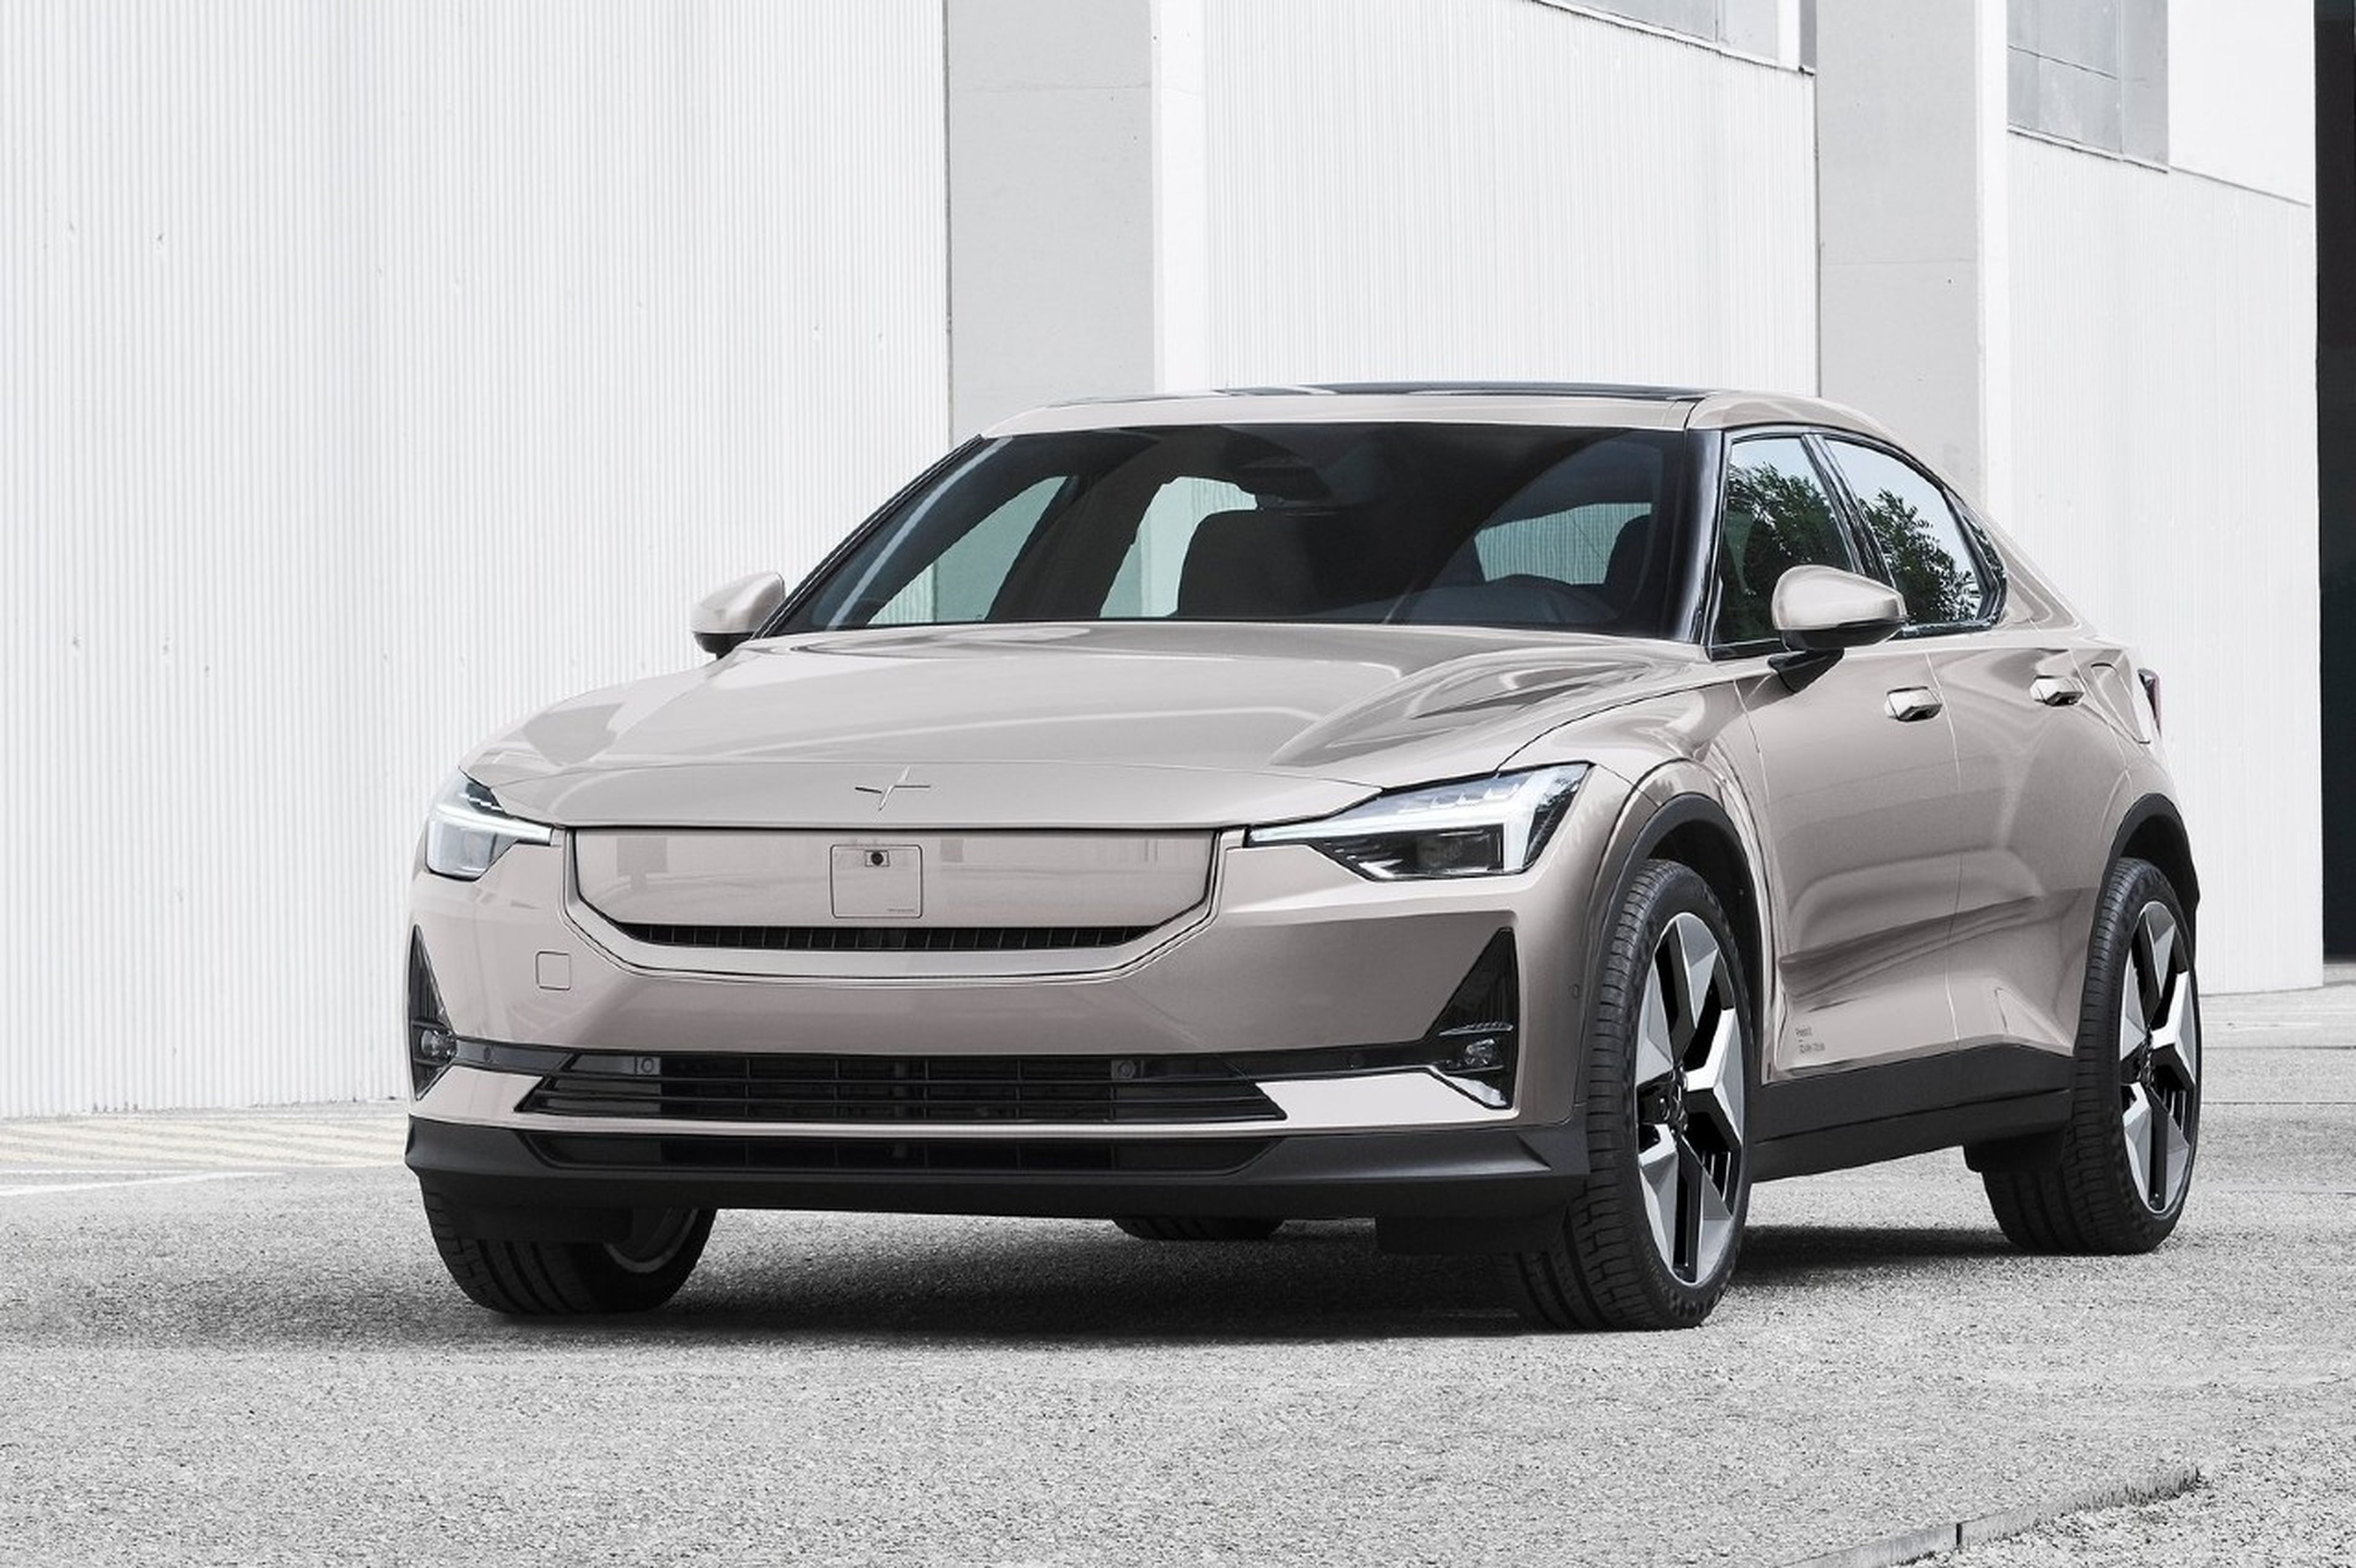 How much does the Polestar 2 cost in Spain